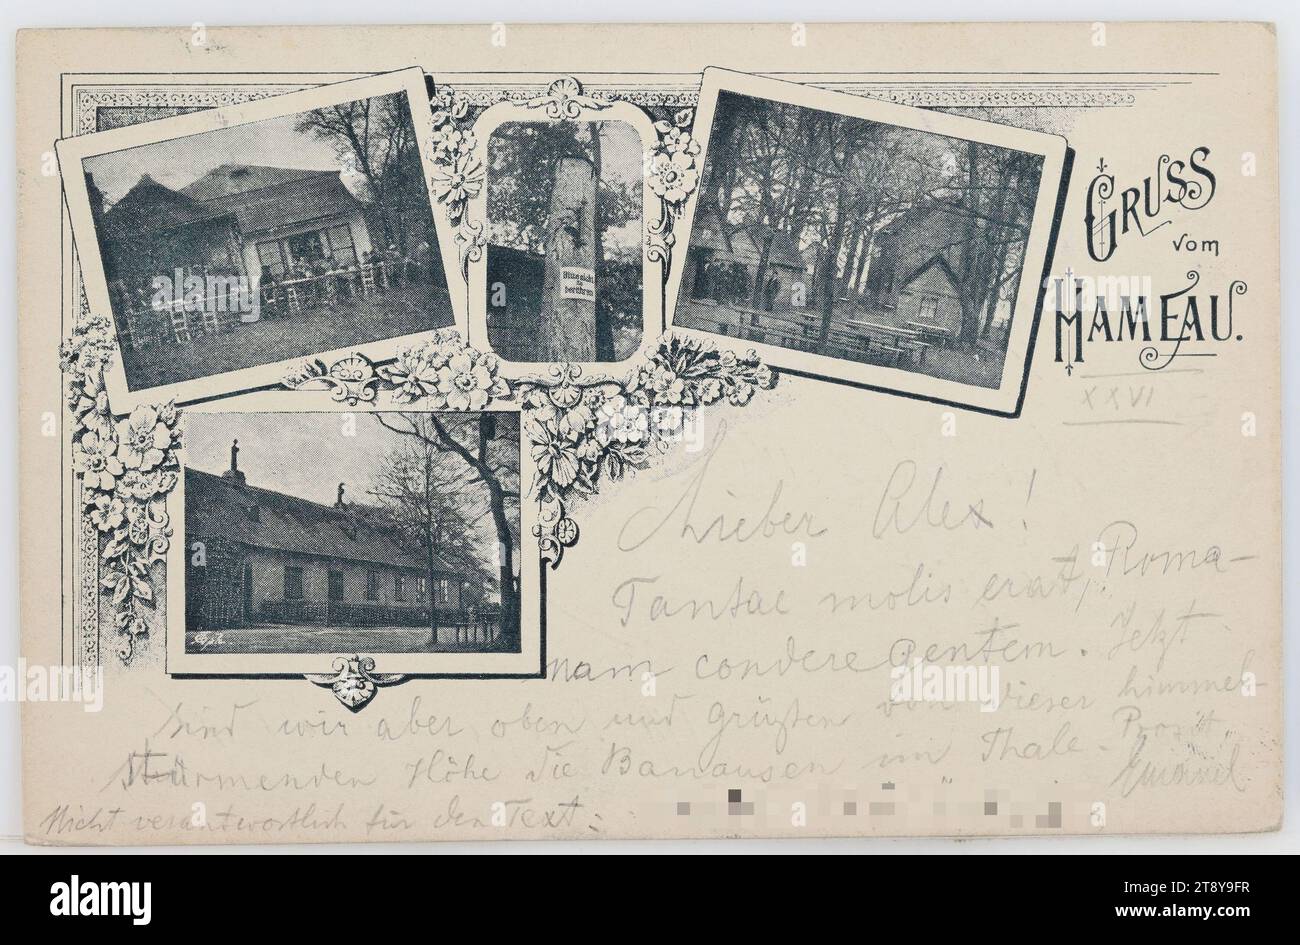 17th, Neuwaldegg - Hameau, picture postcard, unknown, 1898, cardboard, halftone printing, inscription, FROM, Vienna, TO, Vienna, ADDRESS, Hochwohlgeboren Herr, [...], in Vienna, VIII Wickenburgg 16, MESSAGE, Dear Alex!, Tantae molis erat, Romanam condere gentem. But now we are at the top and greet from this heavenly height the philistines in the valley. Prosit, Emanel, Not responsible for the text: [...], [Translation of the Latin quotation: Such trouble it caused to establish the Roman people. Quoted from: Virgil, Aeneid 1.33], Wienerwald, Hotel and restaurant industry Stock Photo